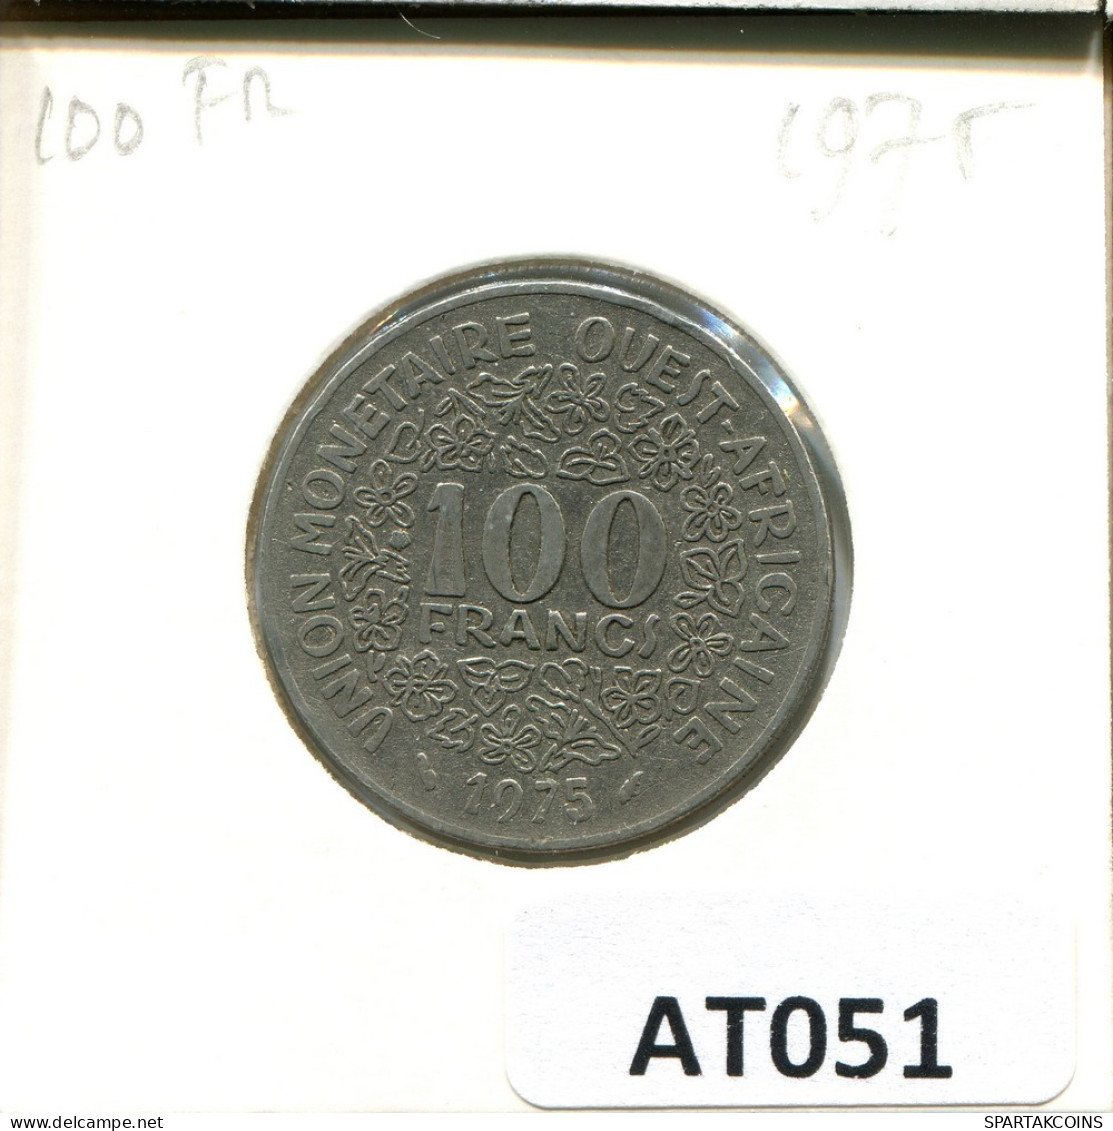 100 FRANCS CFA 1975 Western African States (BCEAO) Moneda #AT051.E.A - Other - Africa